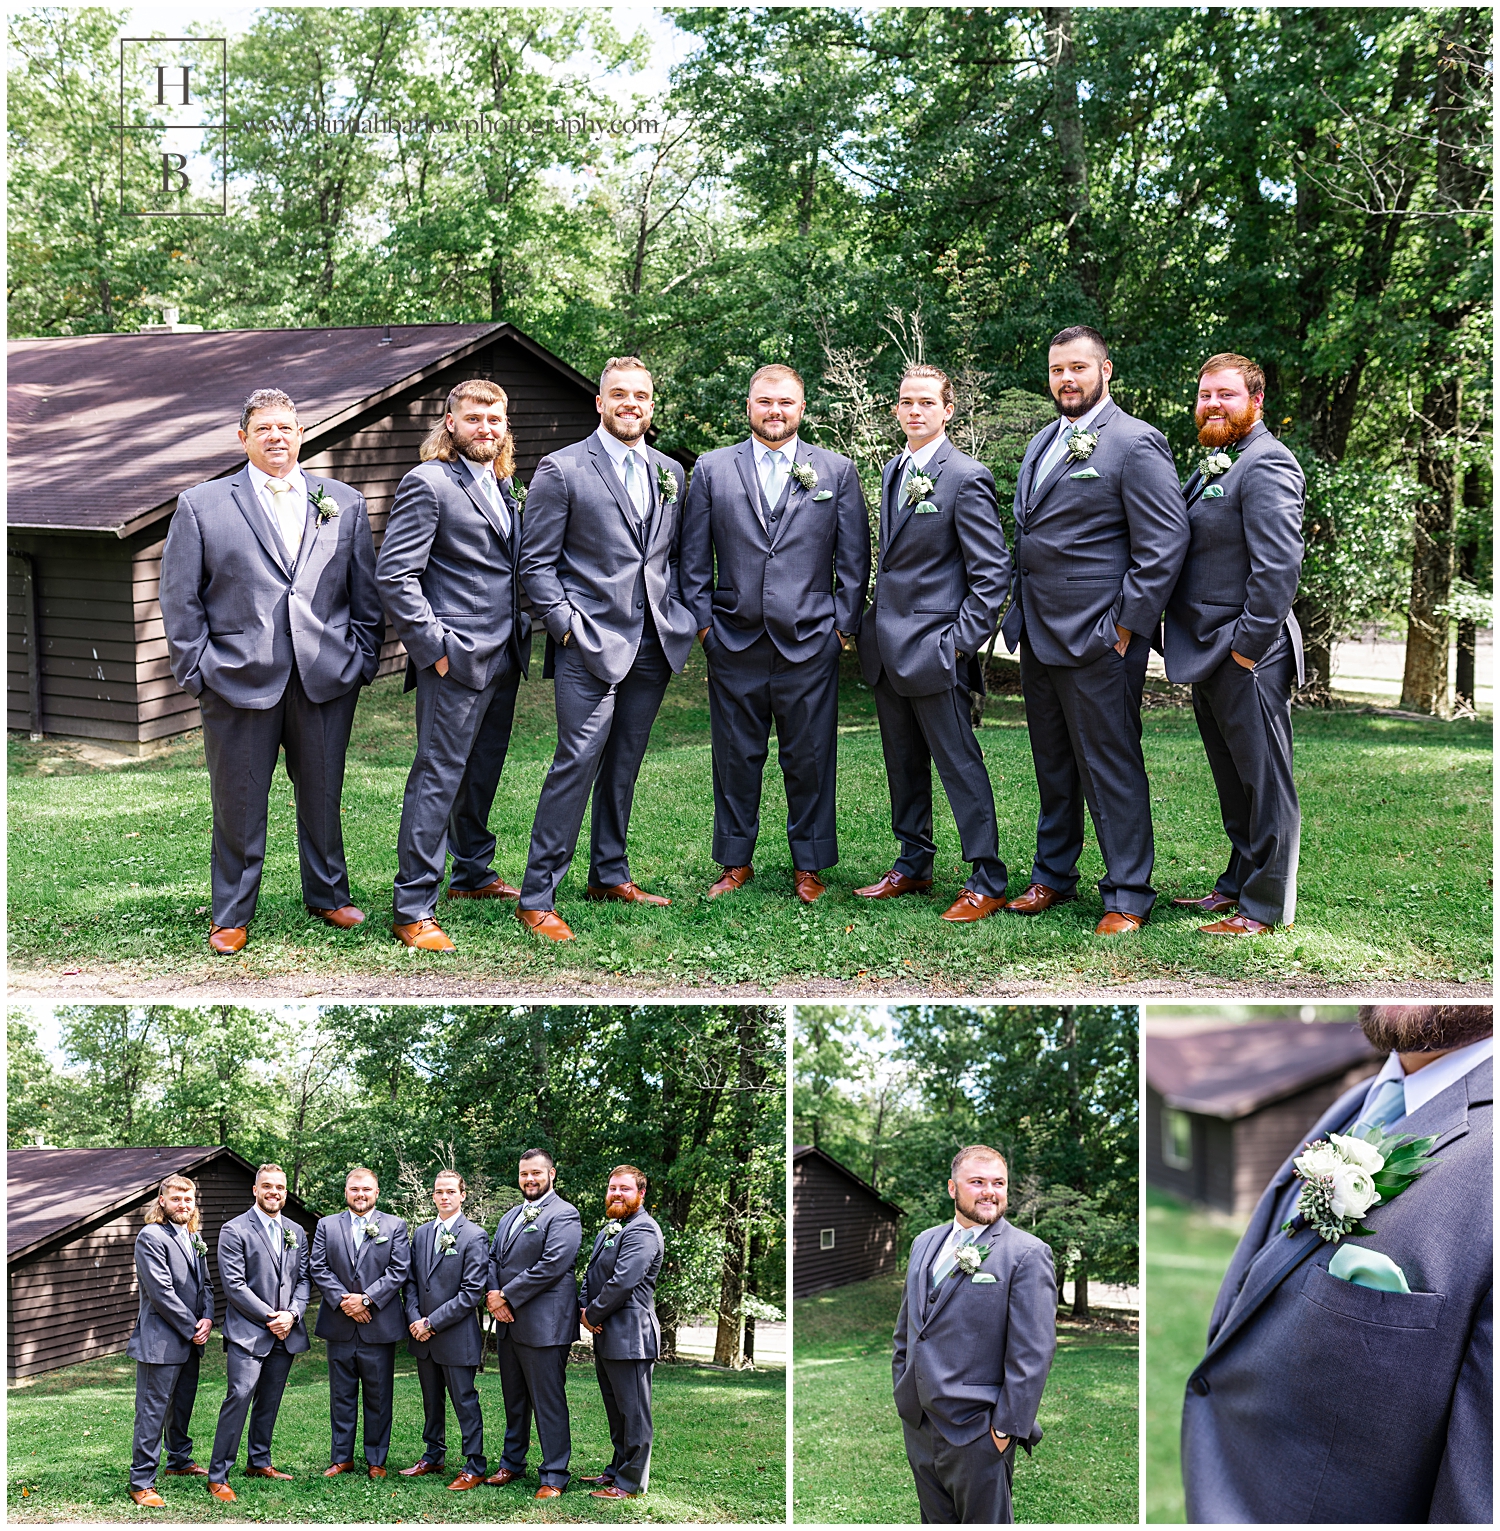  Groom and Groomsmen posing for wedding photos by cabin and forest